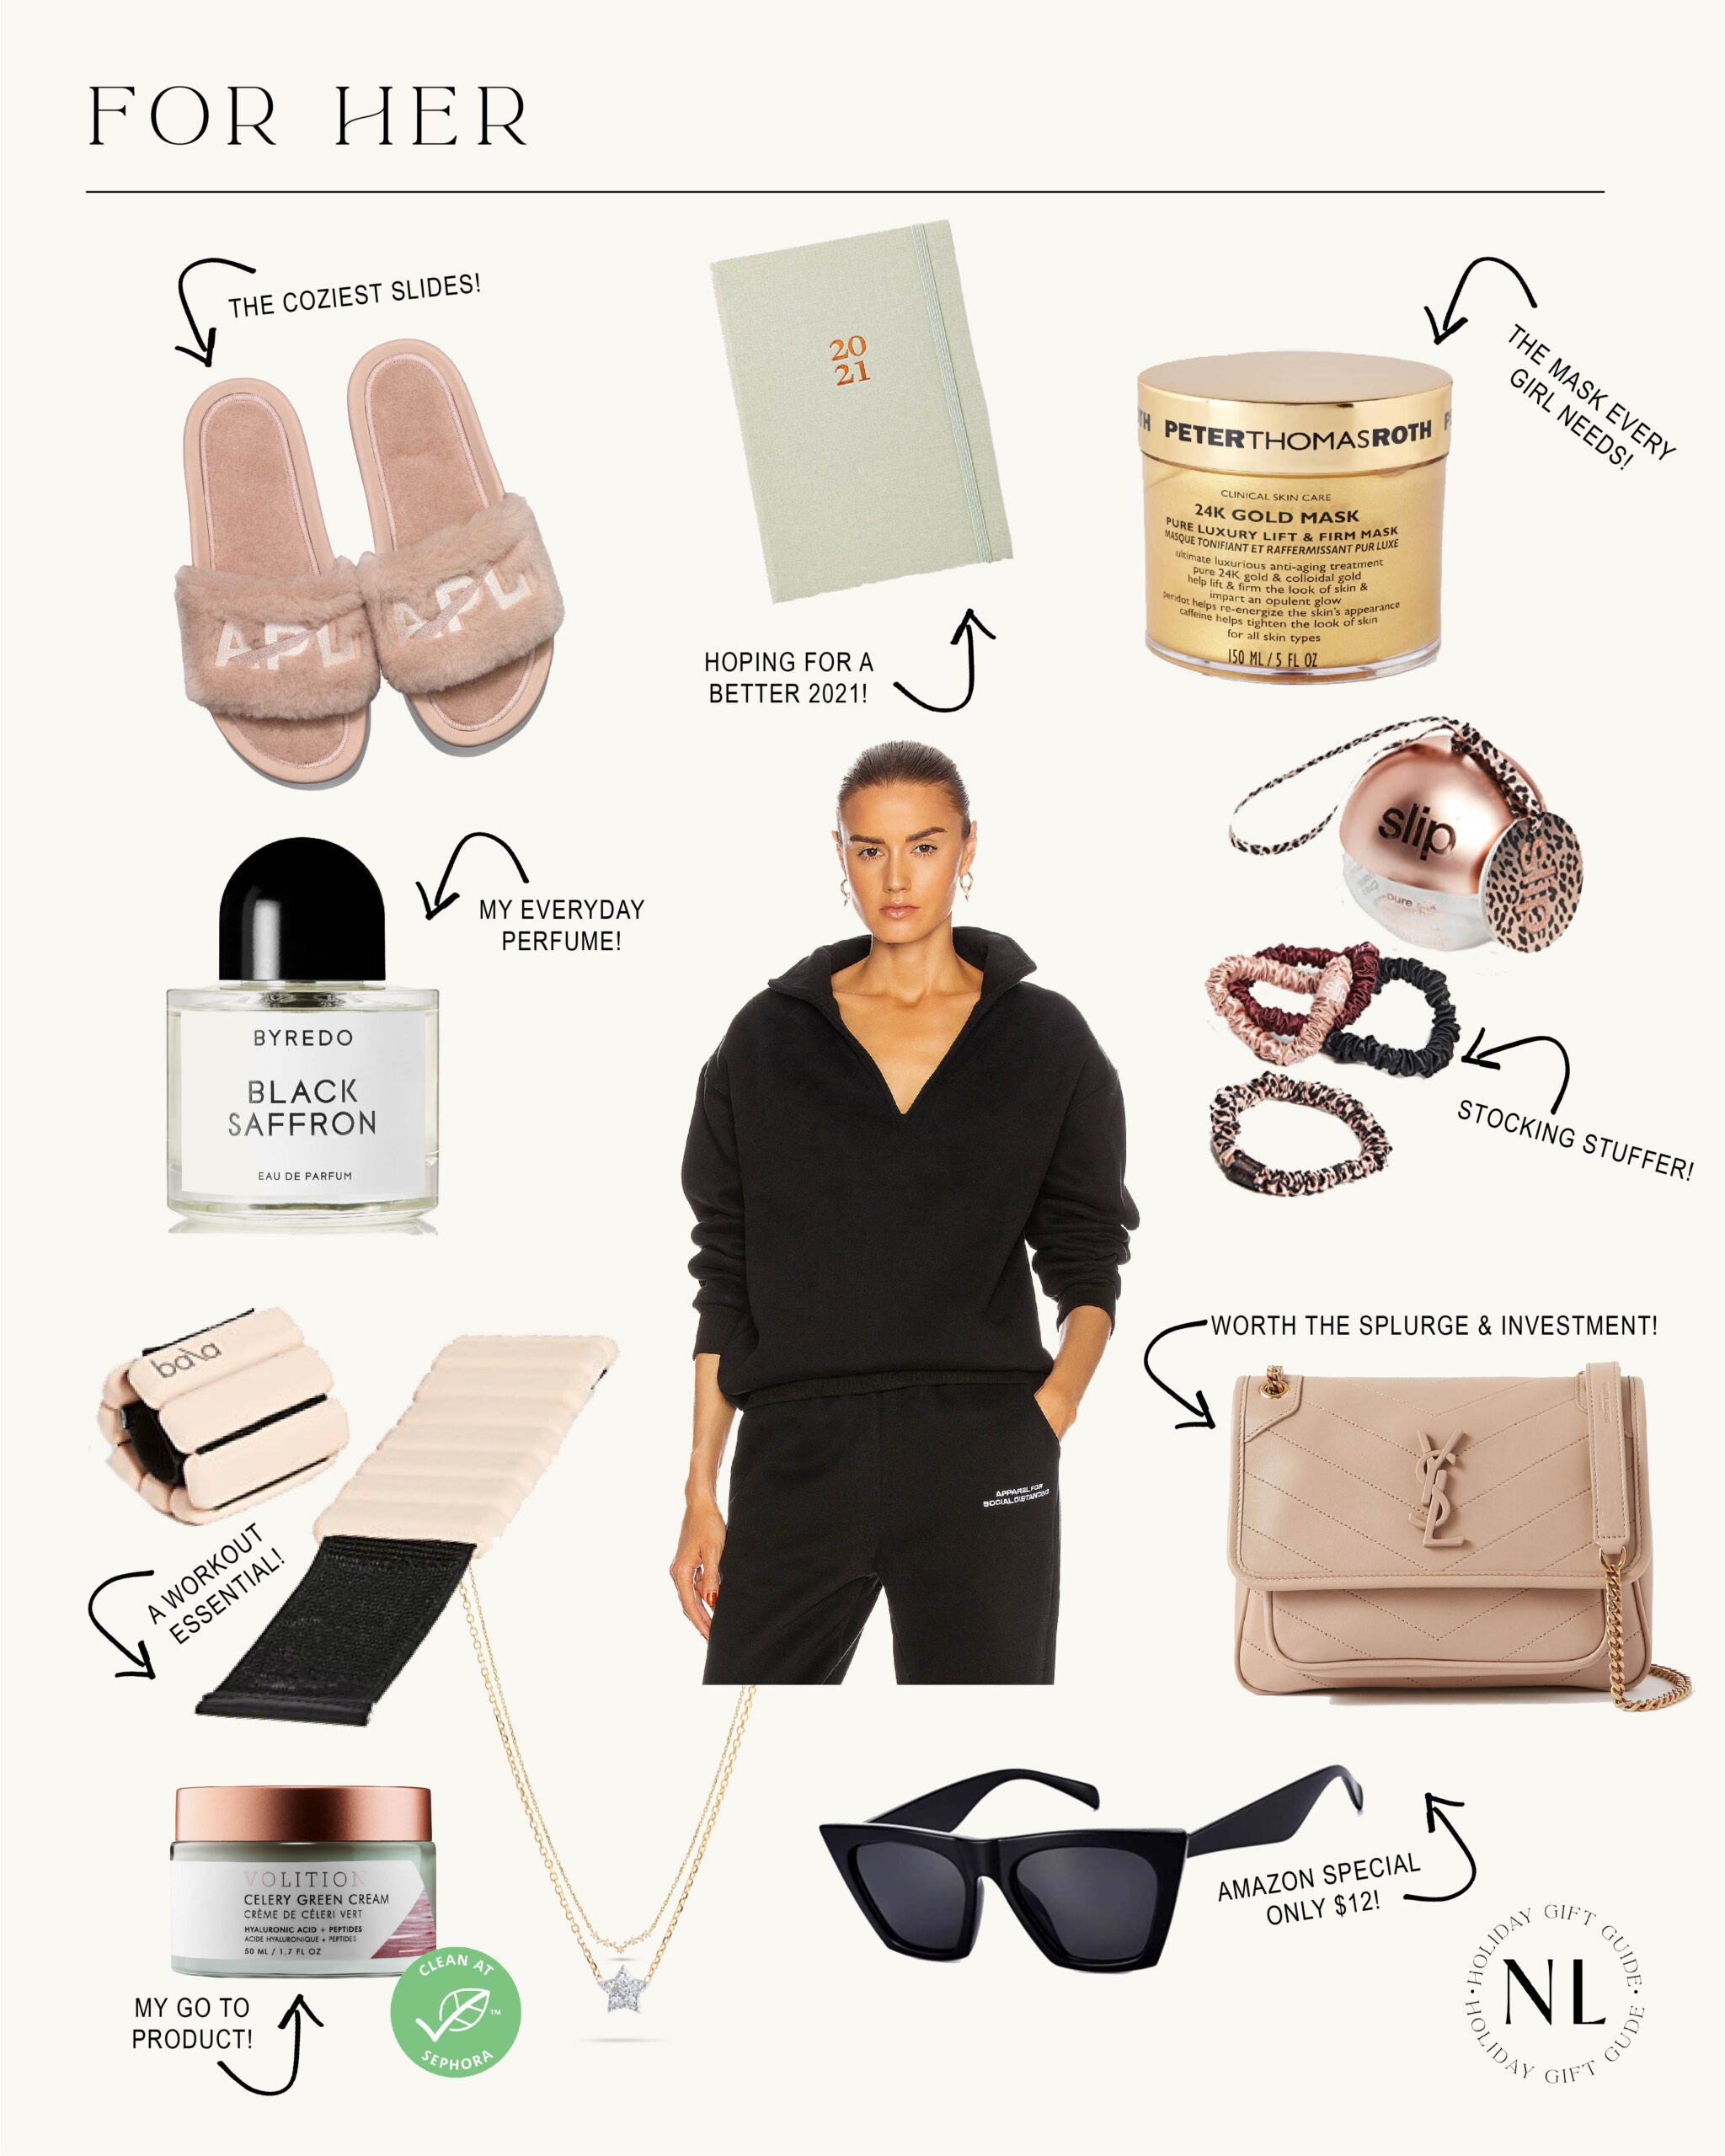 GIFT GUIDE: Gifts For Her